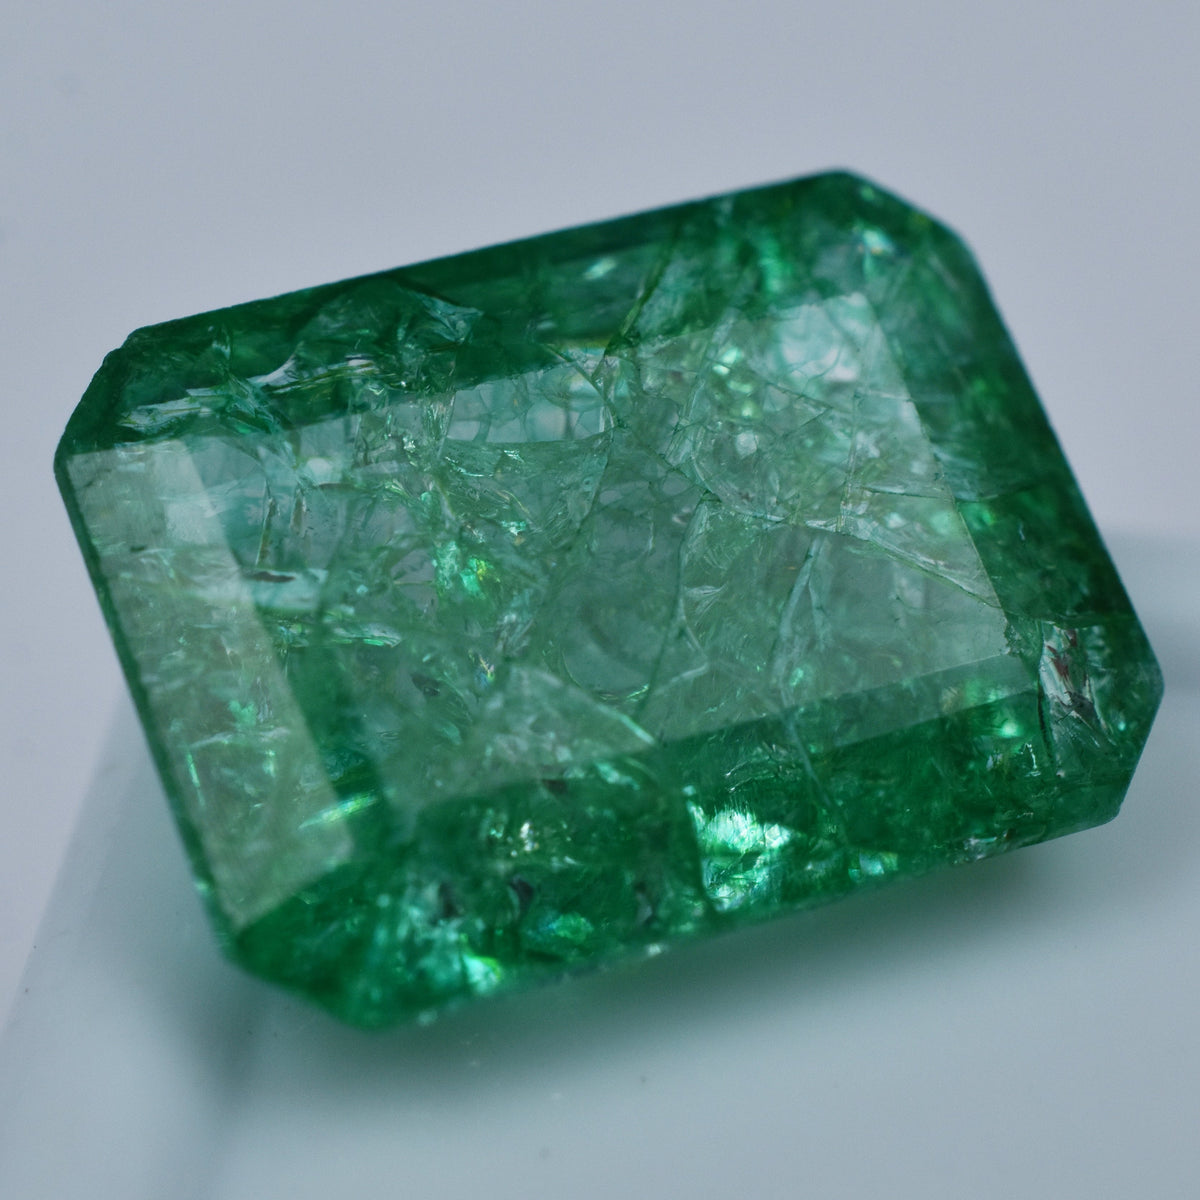 Free Shipping & Gift | Best Offer | A++ Quality Emerald Green Gem 10.45 Carat Emerald Green Emerald Cut Natural Certified Loose Gemstone | Gift For Loved Ones